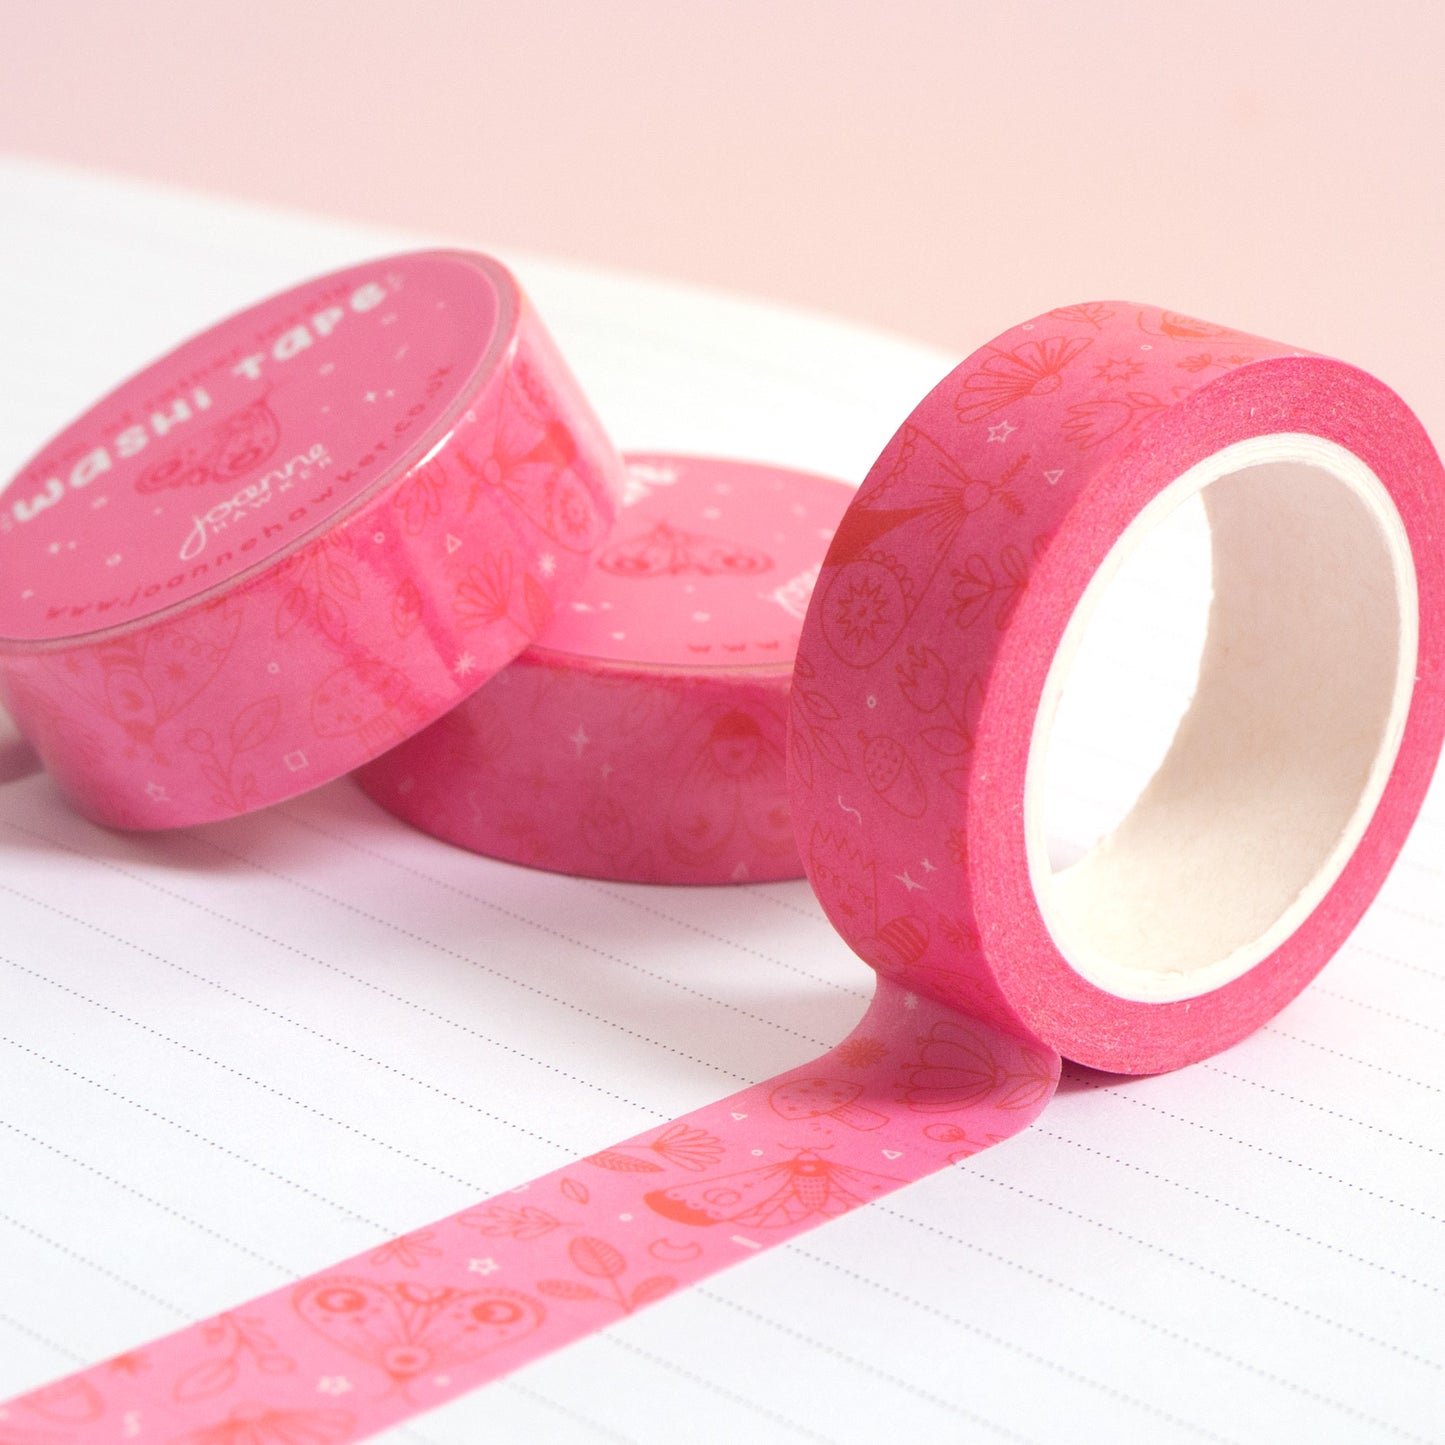 A roll of pink moths washi tape unravelling on a notebook with stacks of paper tape in the background.